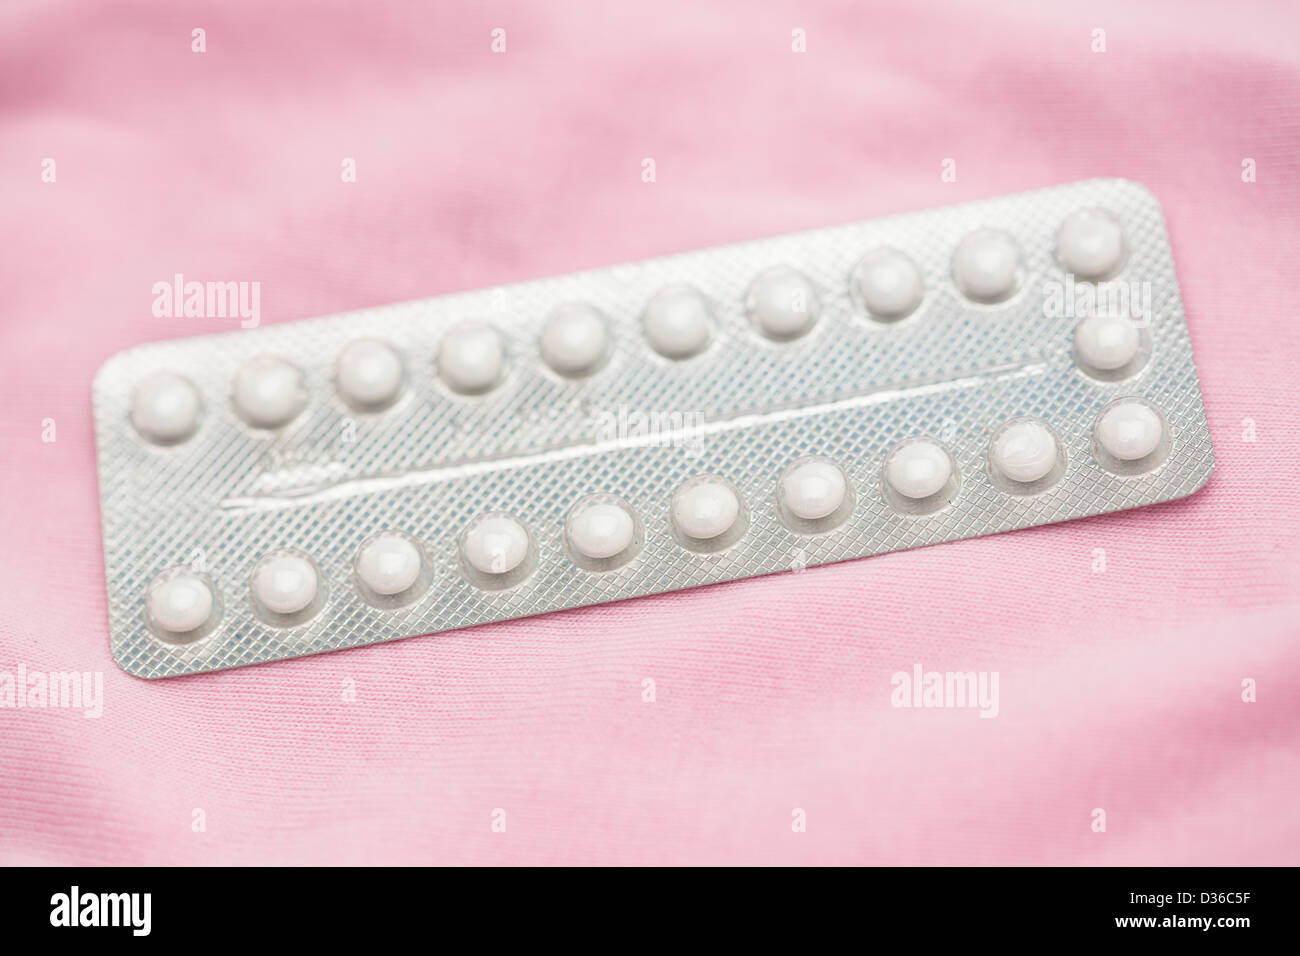 Contraceptive pill packet Stock Photo